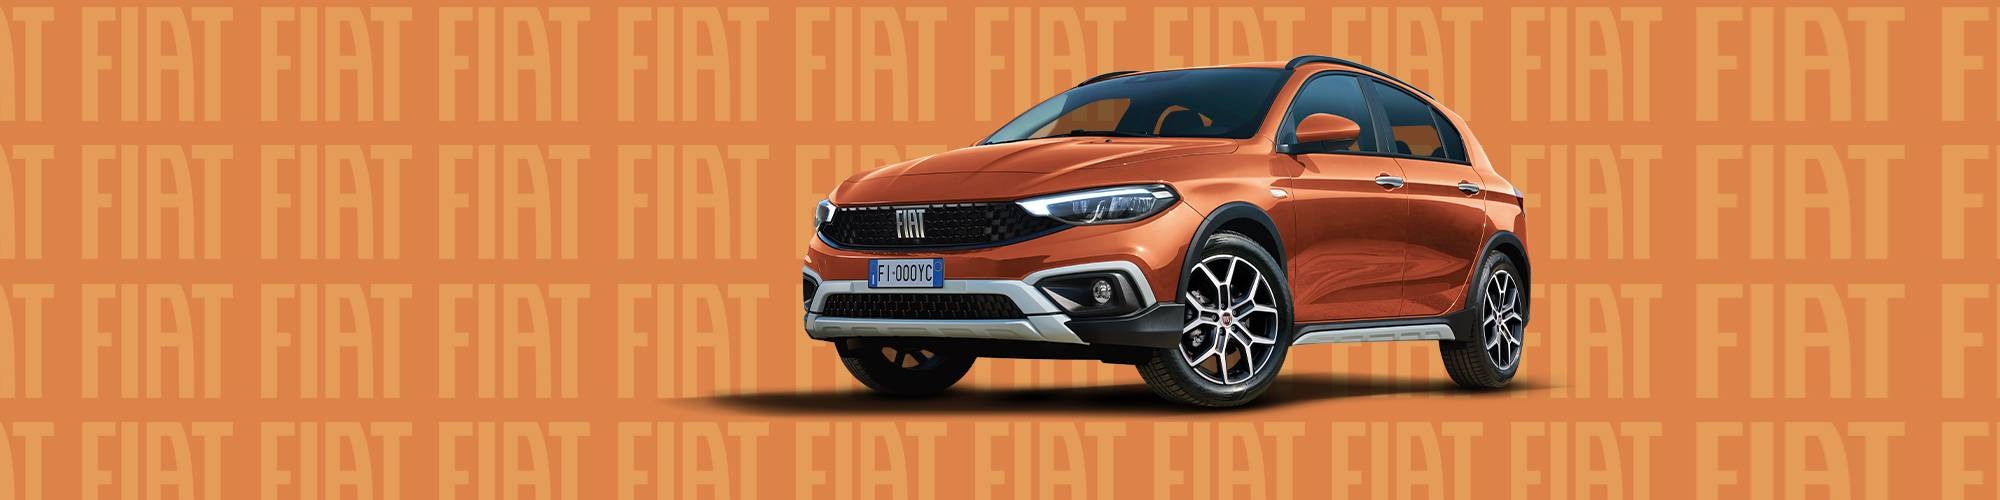 fiat tipo Banner